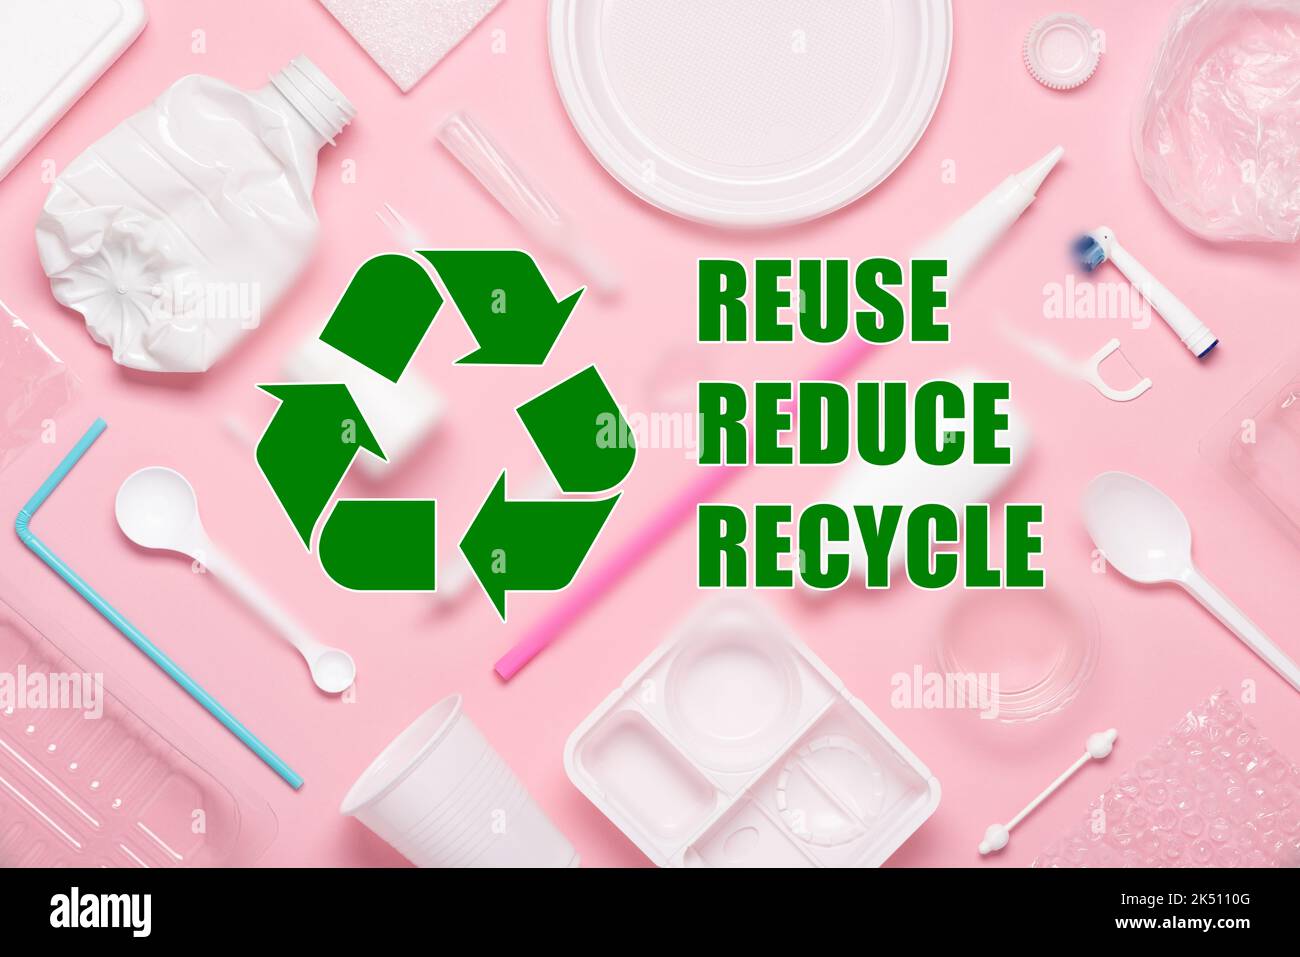 Plastics with recycling symbol and reuse reduce recycle text Stock Photo